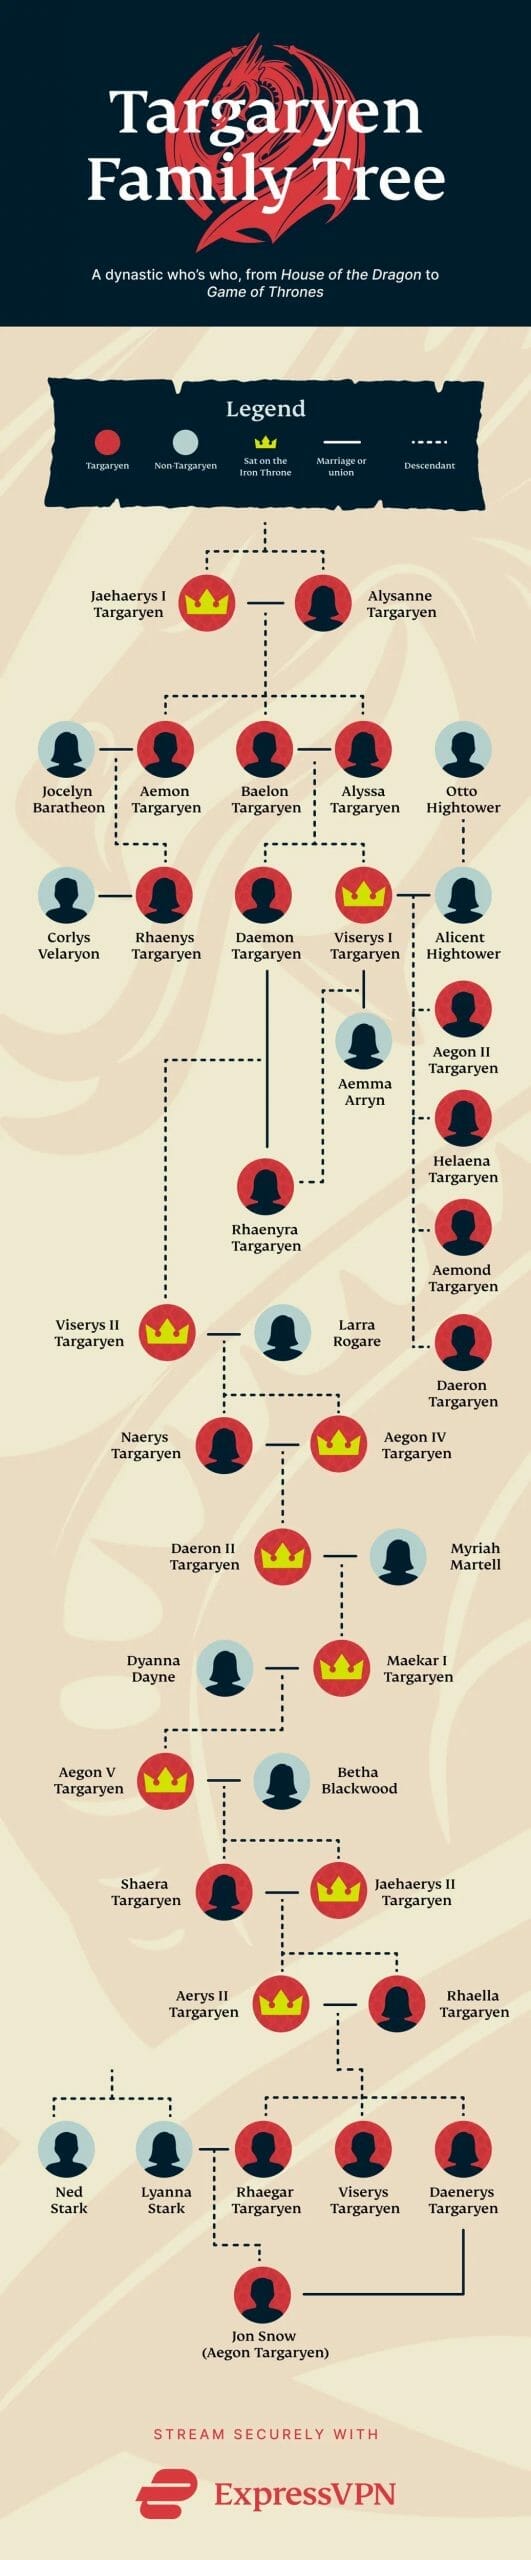 House of the Dragon / Game of Thrones family trees